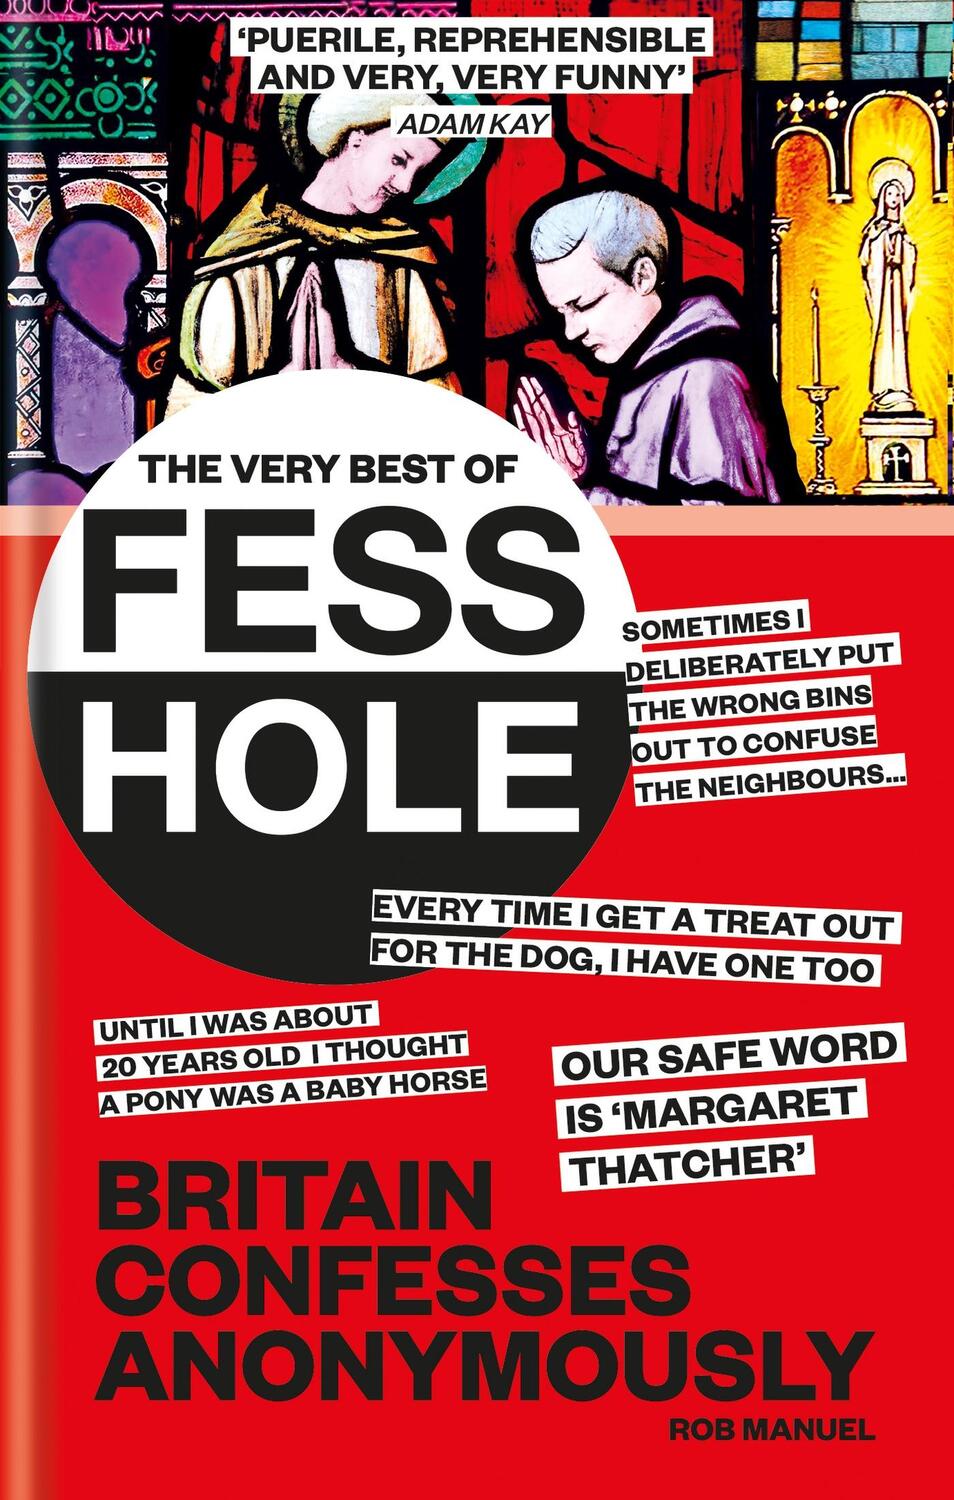 Cover: 9781804190371 | The Very Best of Fesshole | Britain confesses anonymously | Rob Manuel